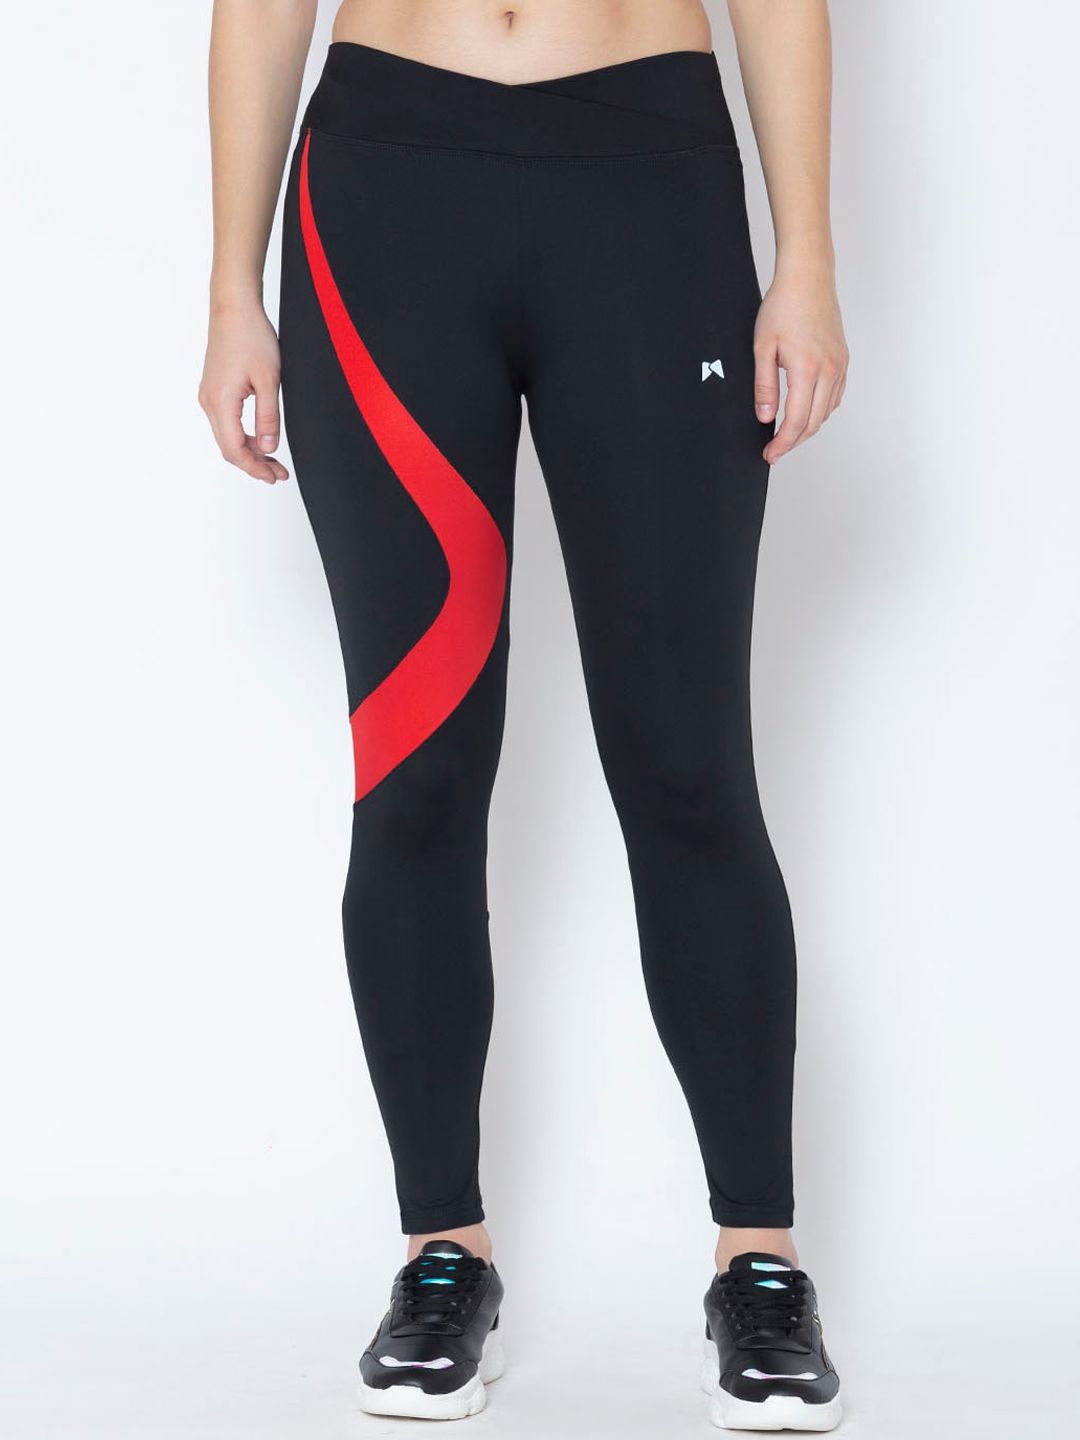 MUSCLE TORQUE Women Black & Red Colorblocked Skinny-Fit Tights Price in India